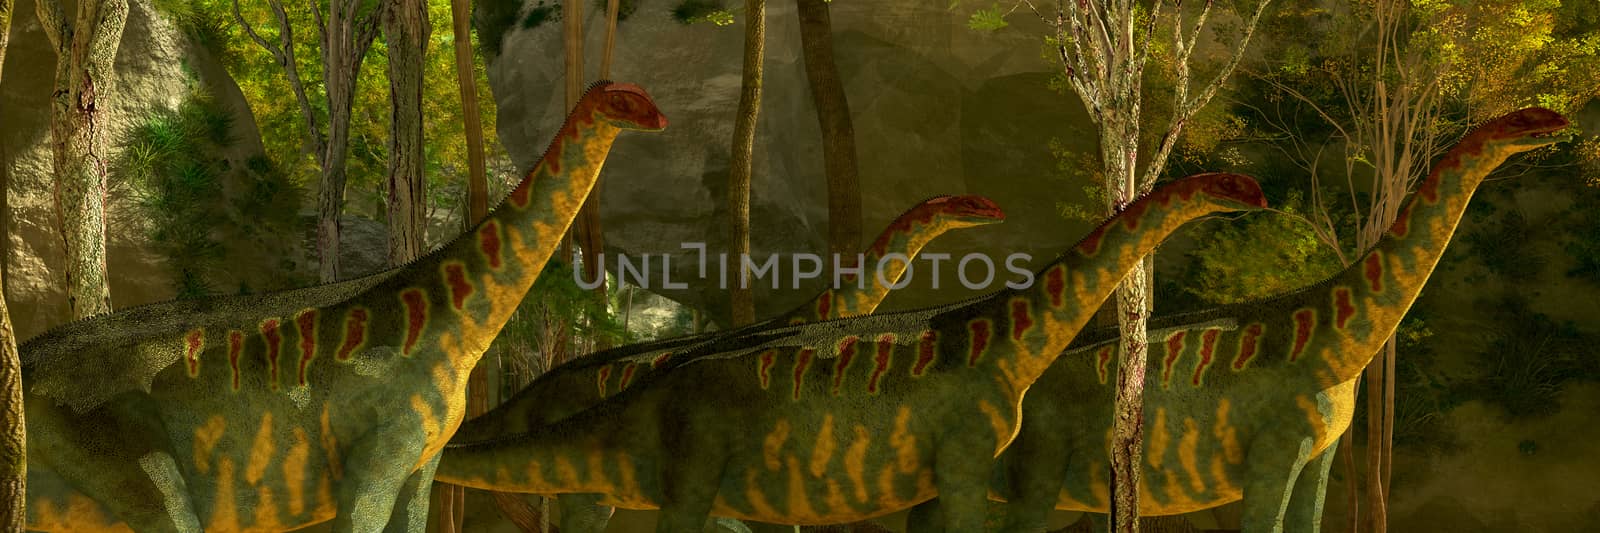 Jobaria Dinosaurs in Forest by Catmando